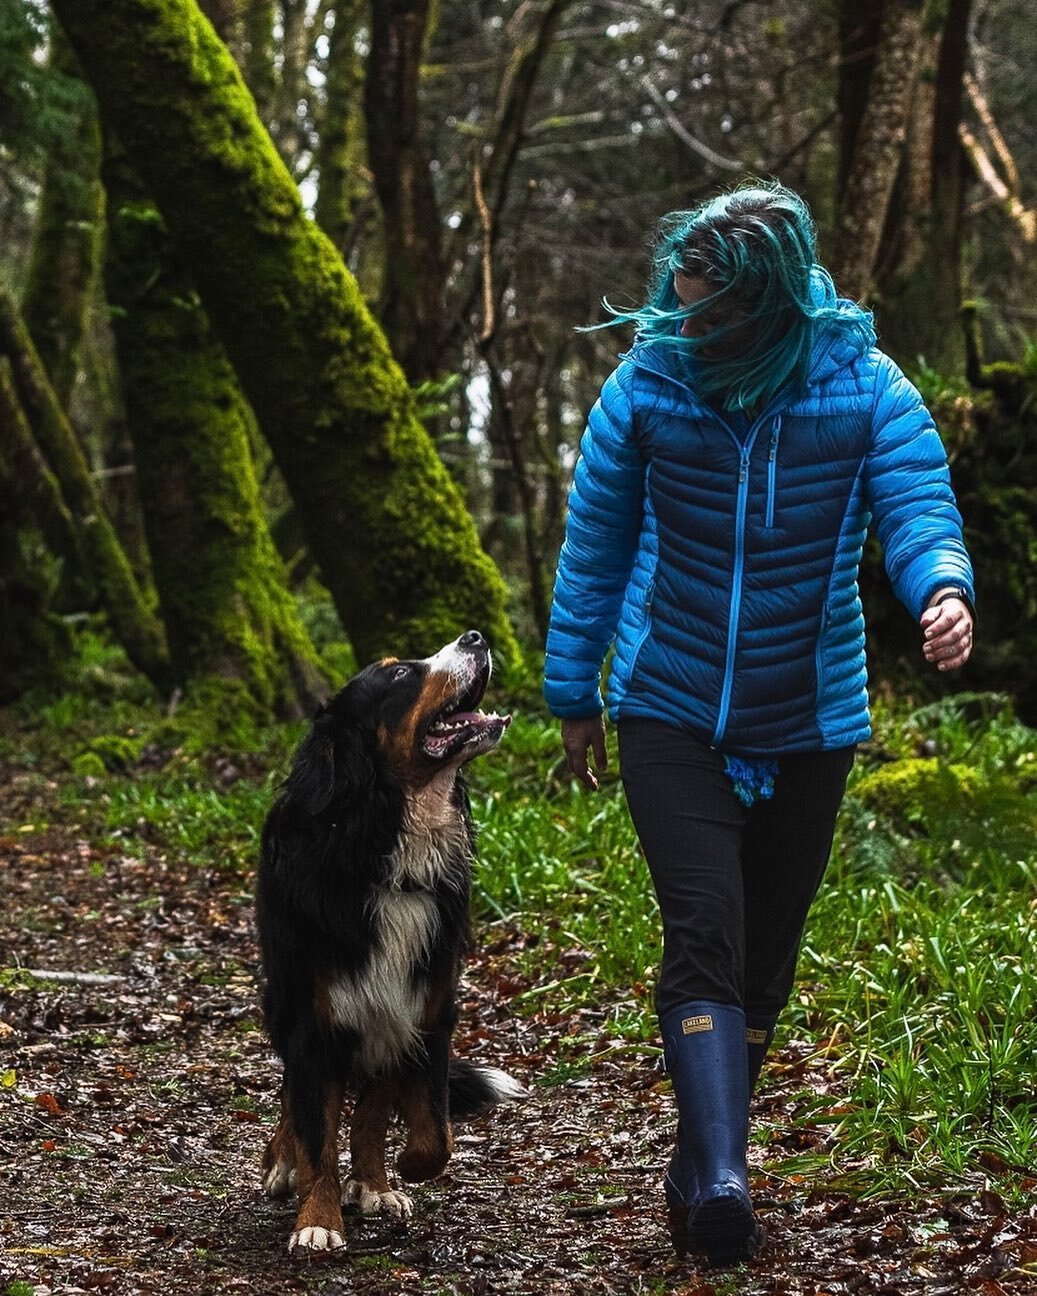 Spring walks with your best bud to shake off the late winter blues&hellip;. Nothing like it. 💙 #designedbyyou 📸: @matthew_tufts